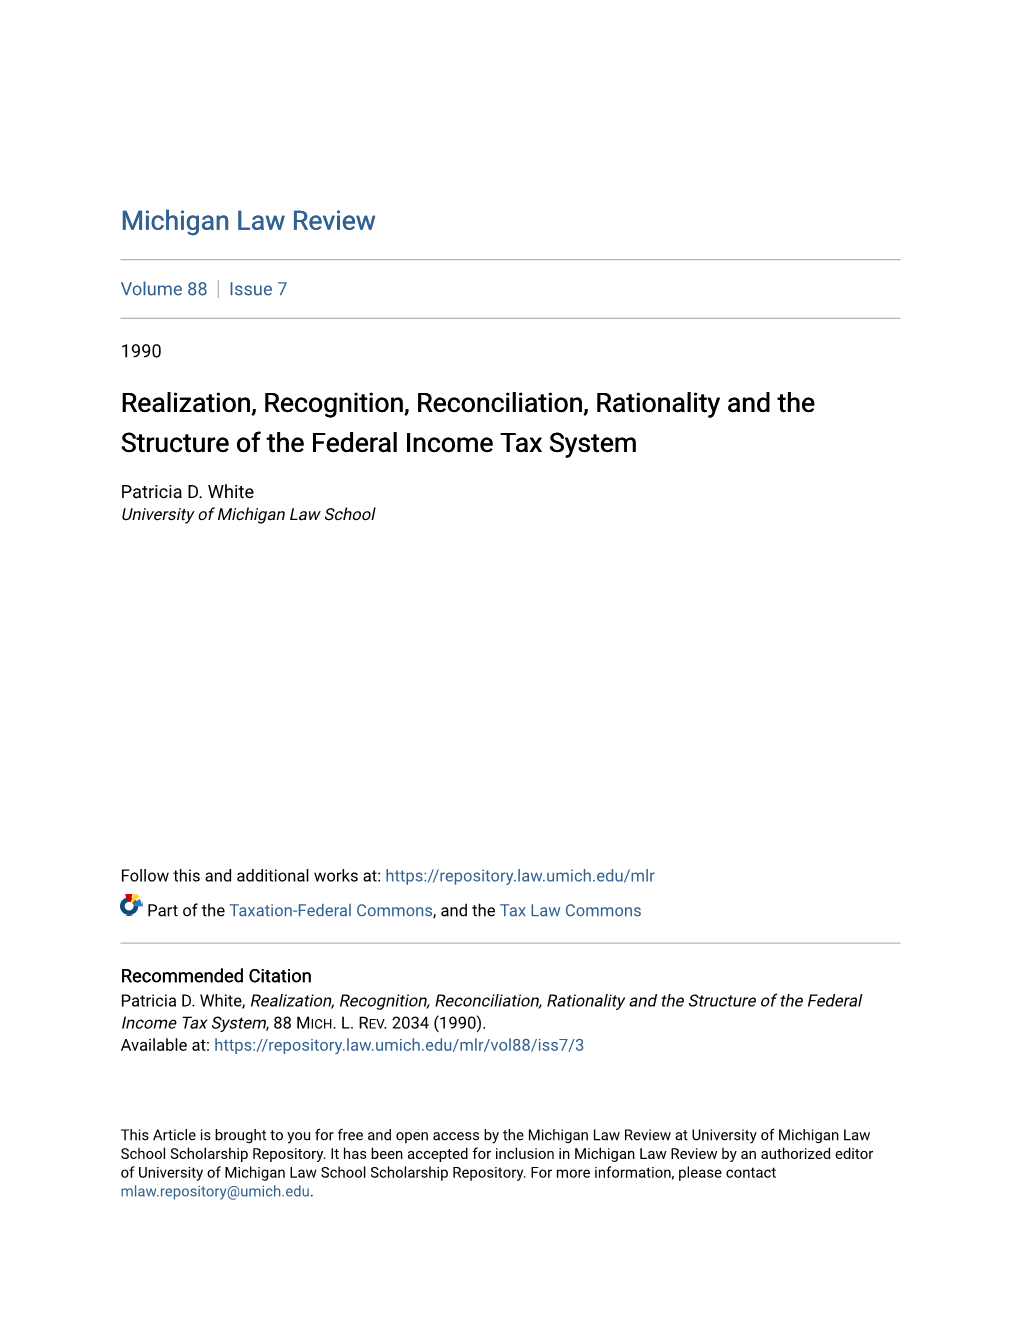 Realization, Recognition, Reconciliation, Rationality and the Structure of the Federal Income Tax System